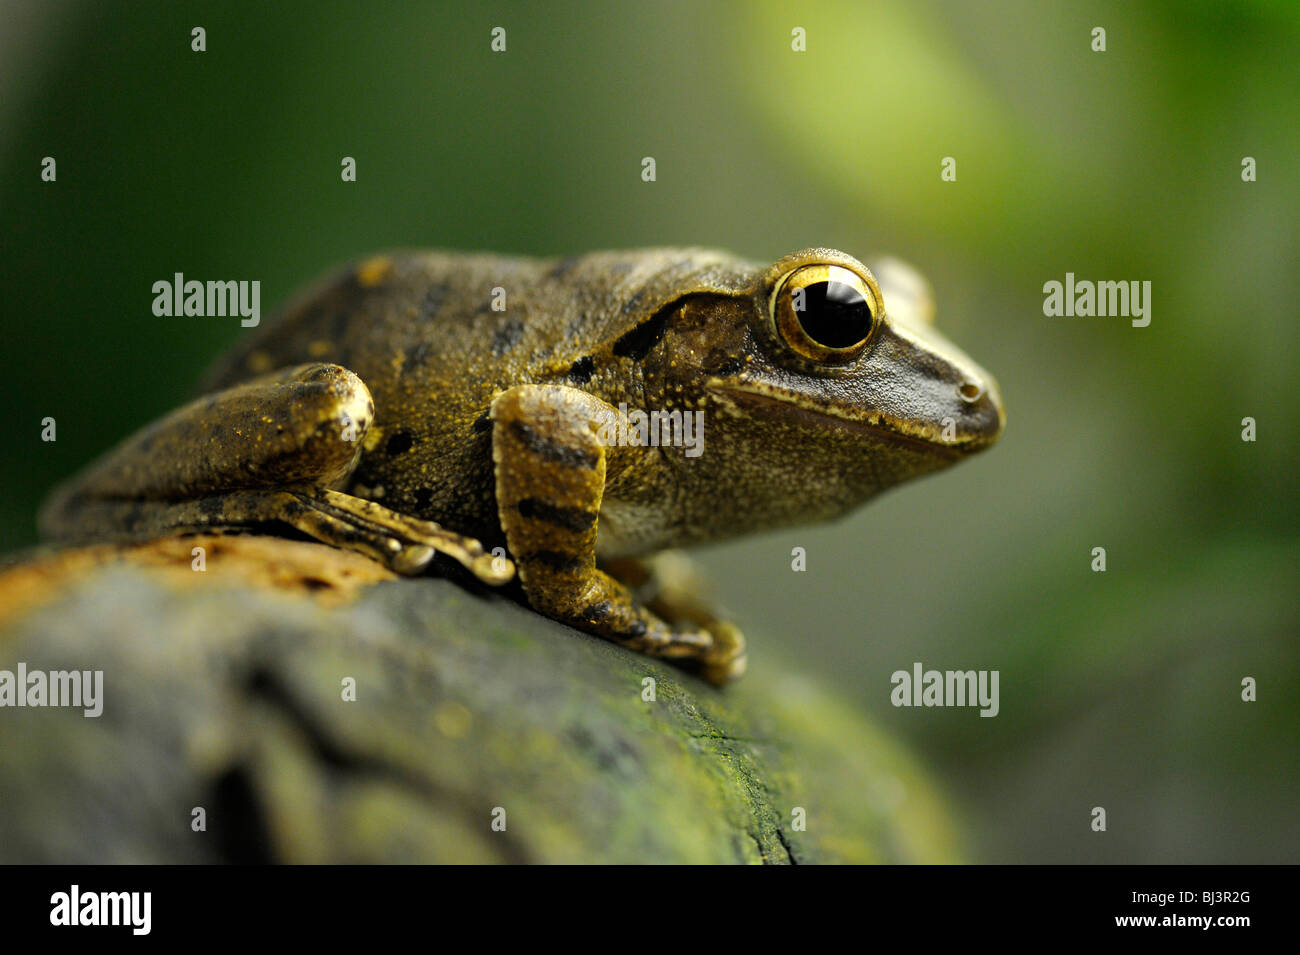 Common Tree Frog, Four-lined Tree Frog, or White-lipped Tree Frog (Polypedates leucomystax), Greater Sunda Islands, South East  Stock Photo